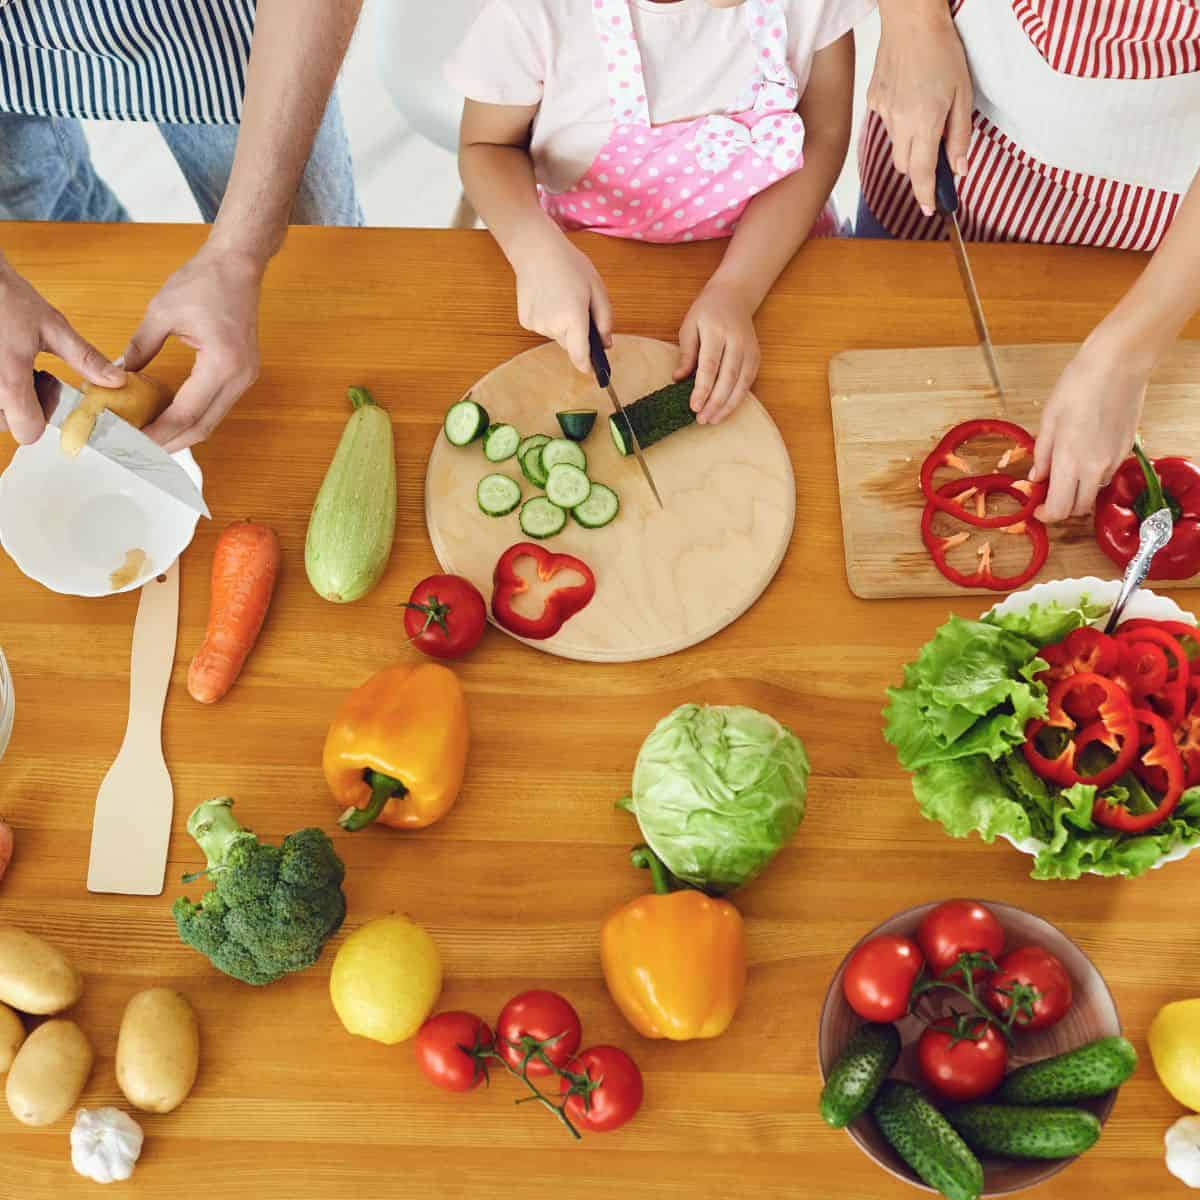 How to get your child to eat vegetables when they refuse, without bribing or tricking. Find 9 of the best strategies for when your child or toddler won’t eat vegetables.